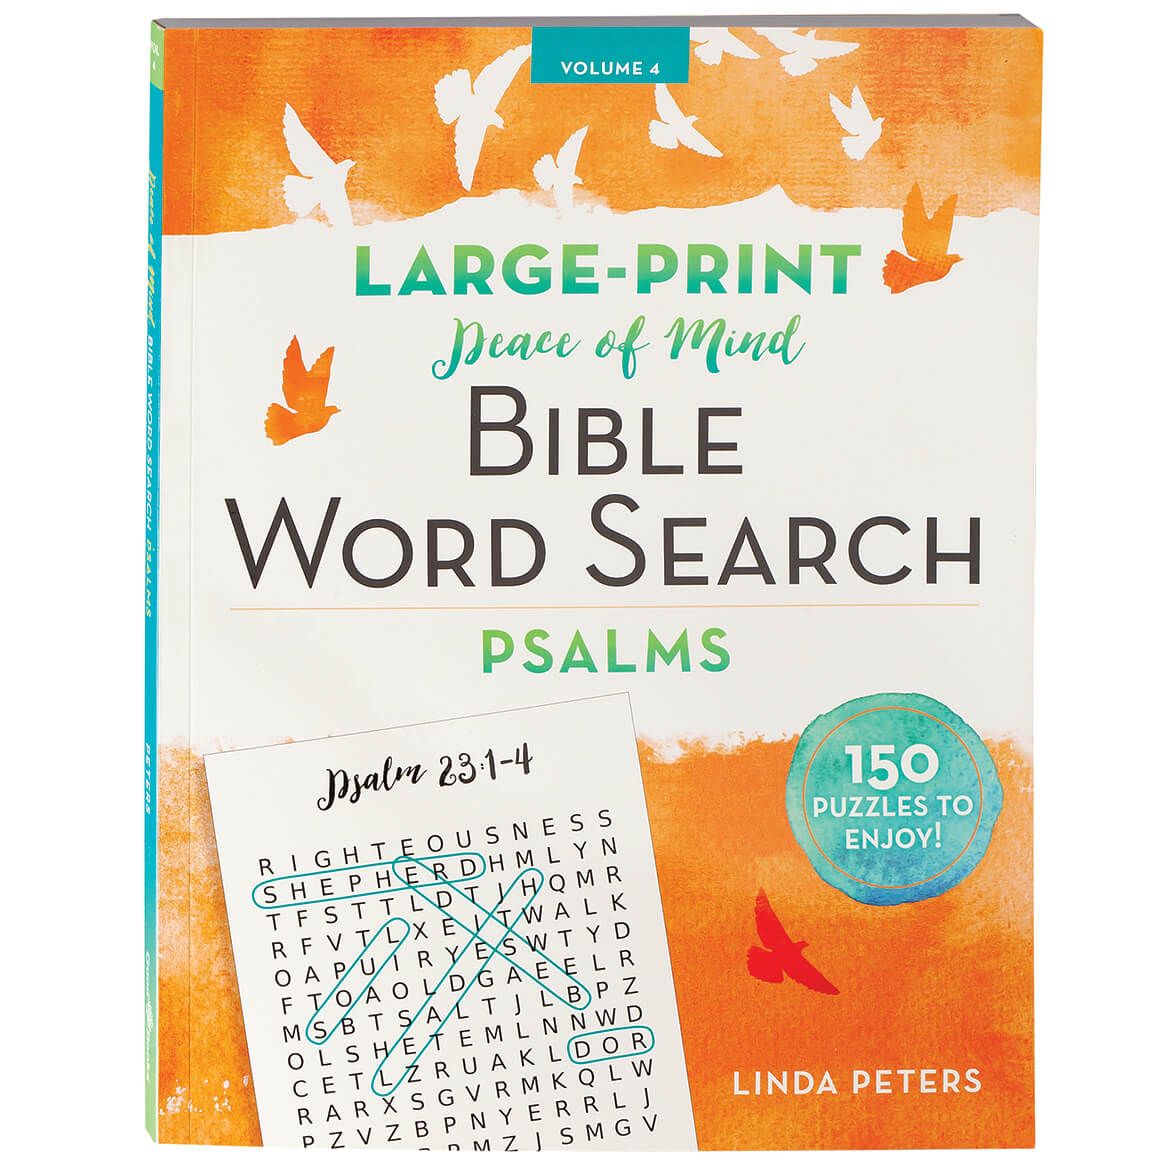 Peace of Mind Bible Word Search: Psalms + '-' + 371699